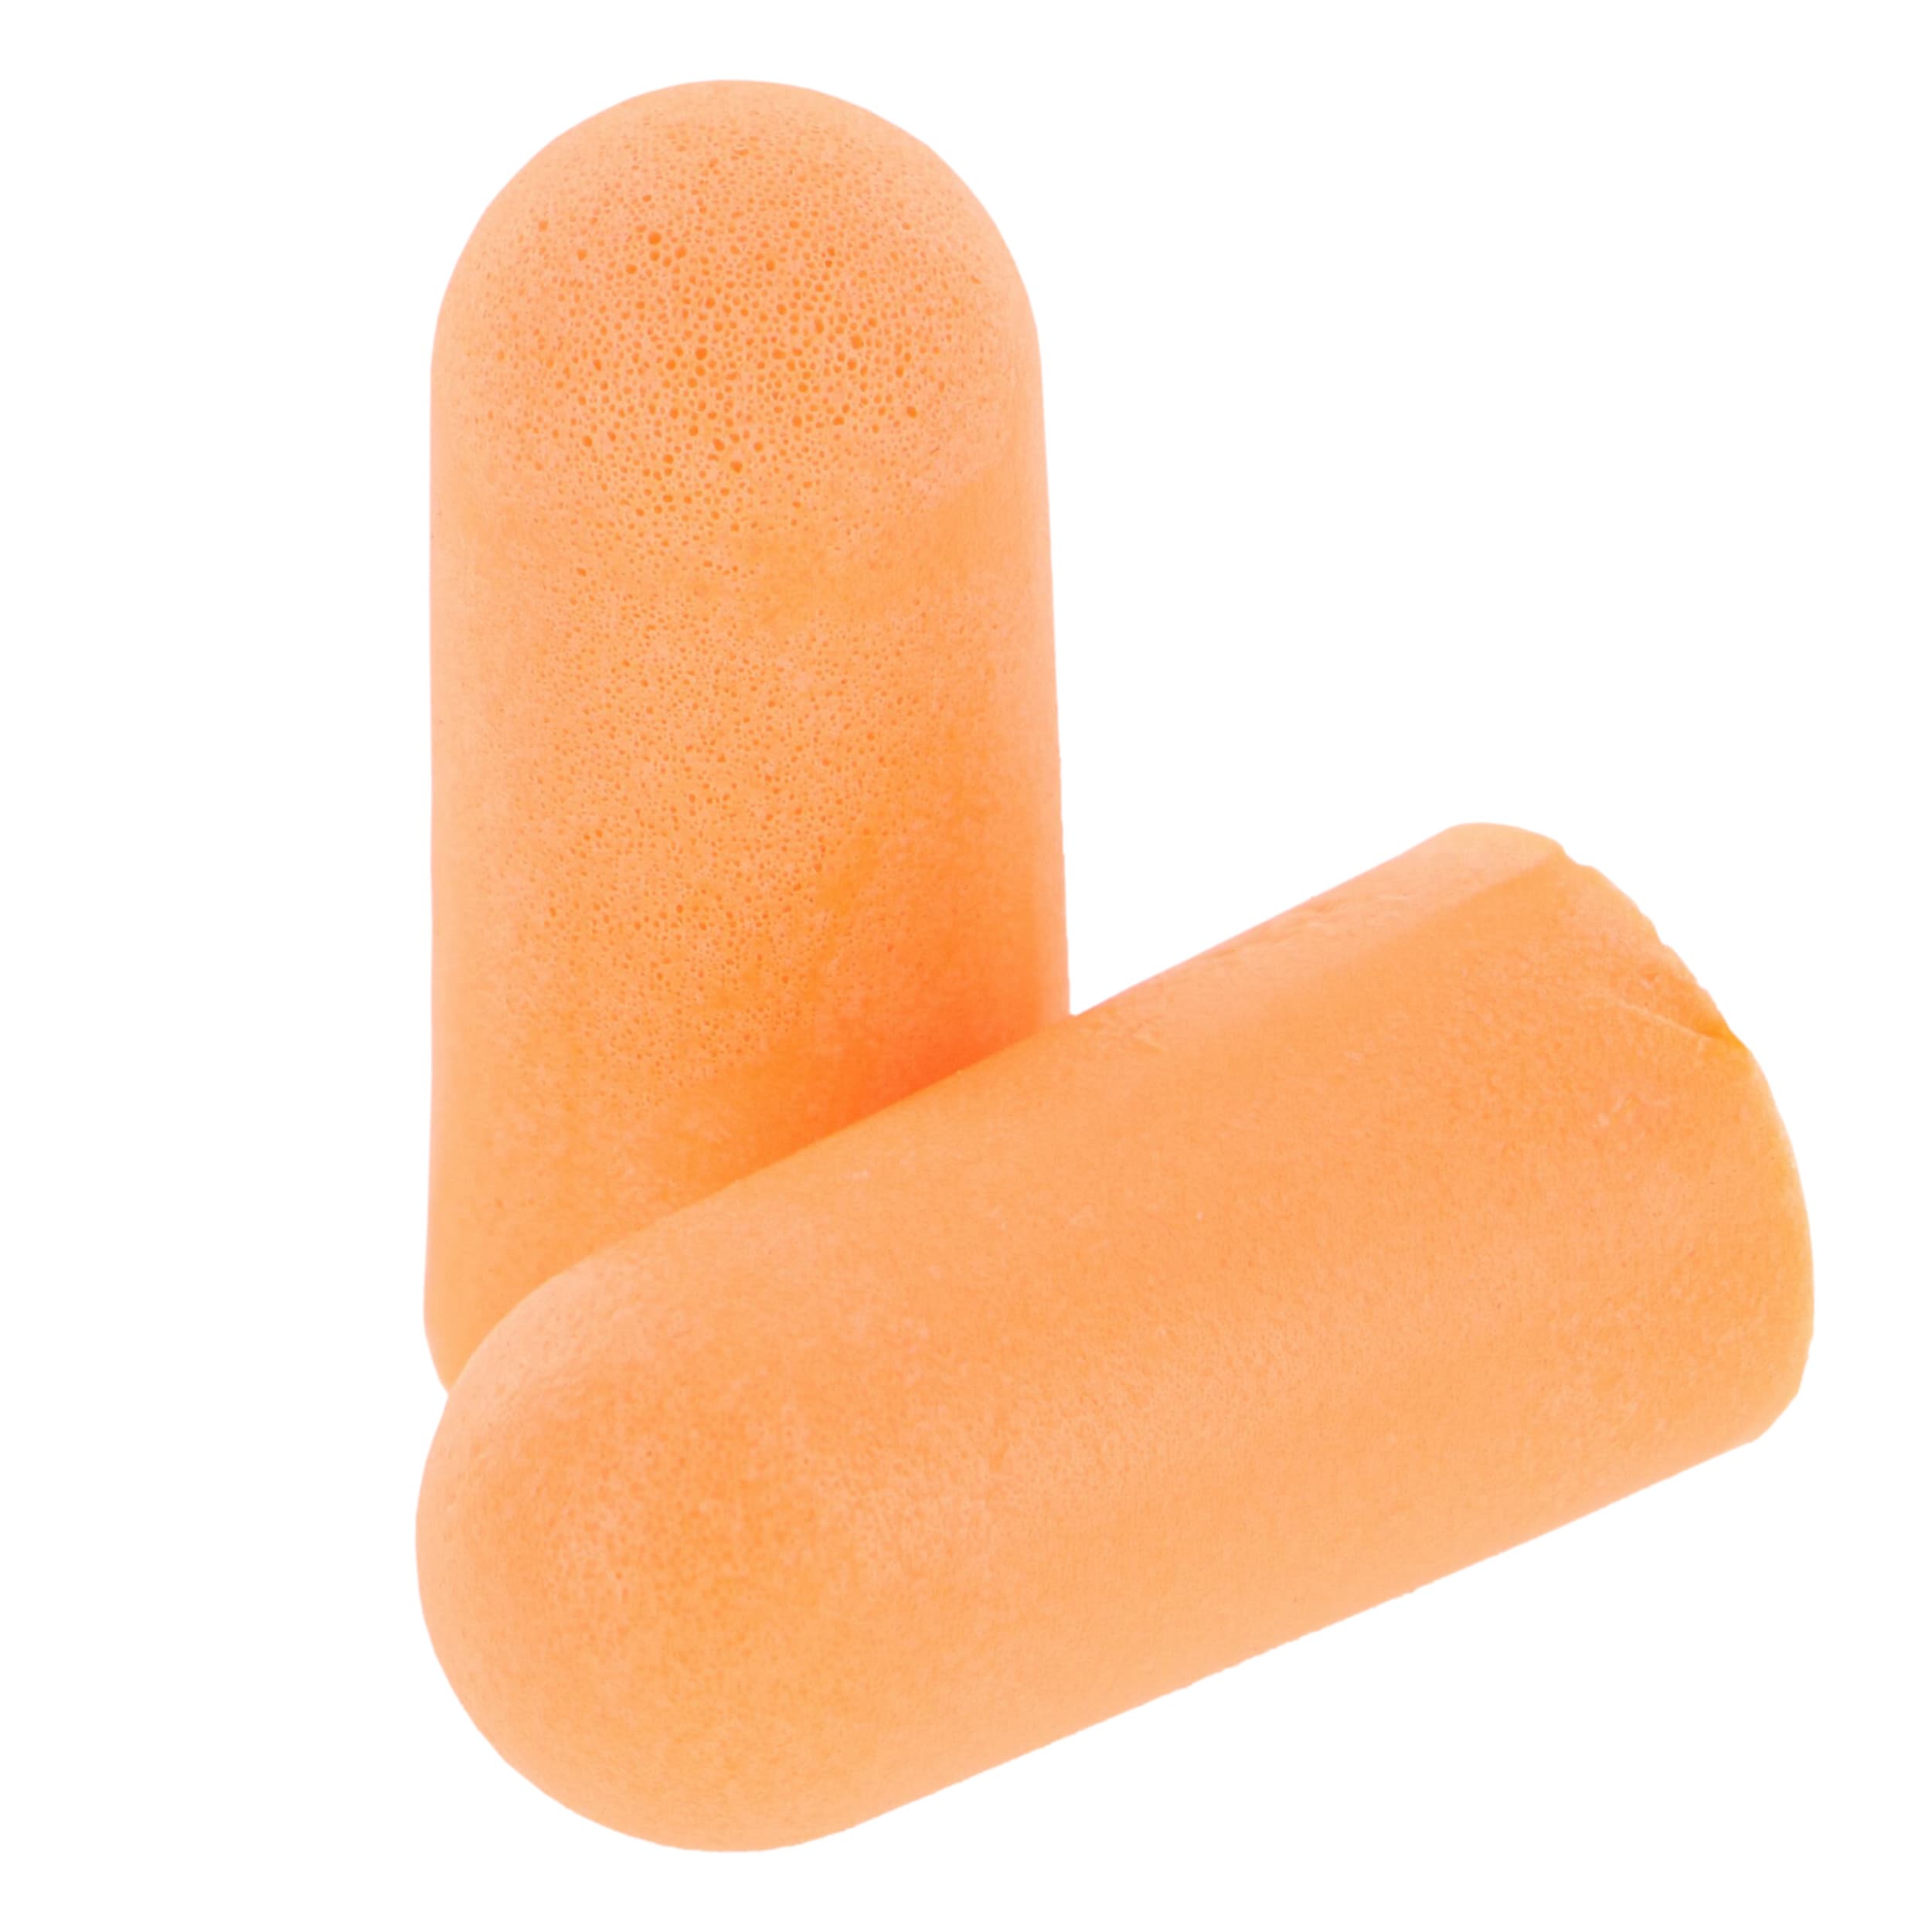 HEAROS 100-Pack Hearing Protection Earplugs in the Hearing